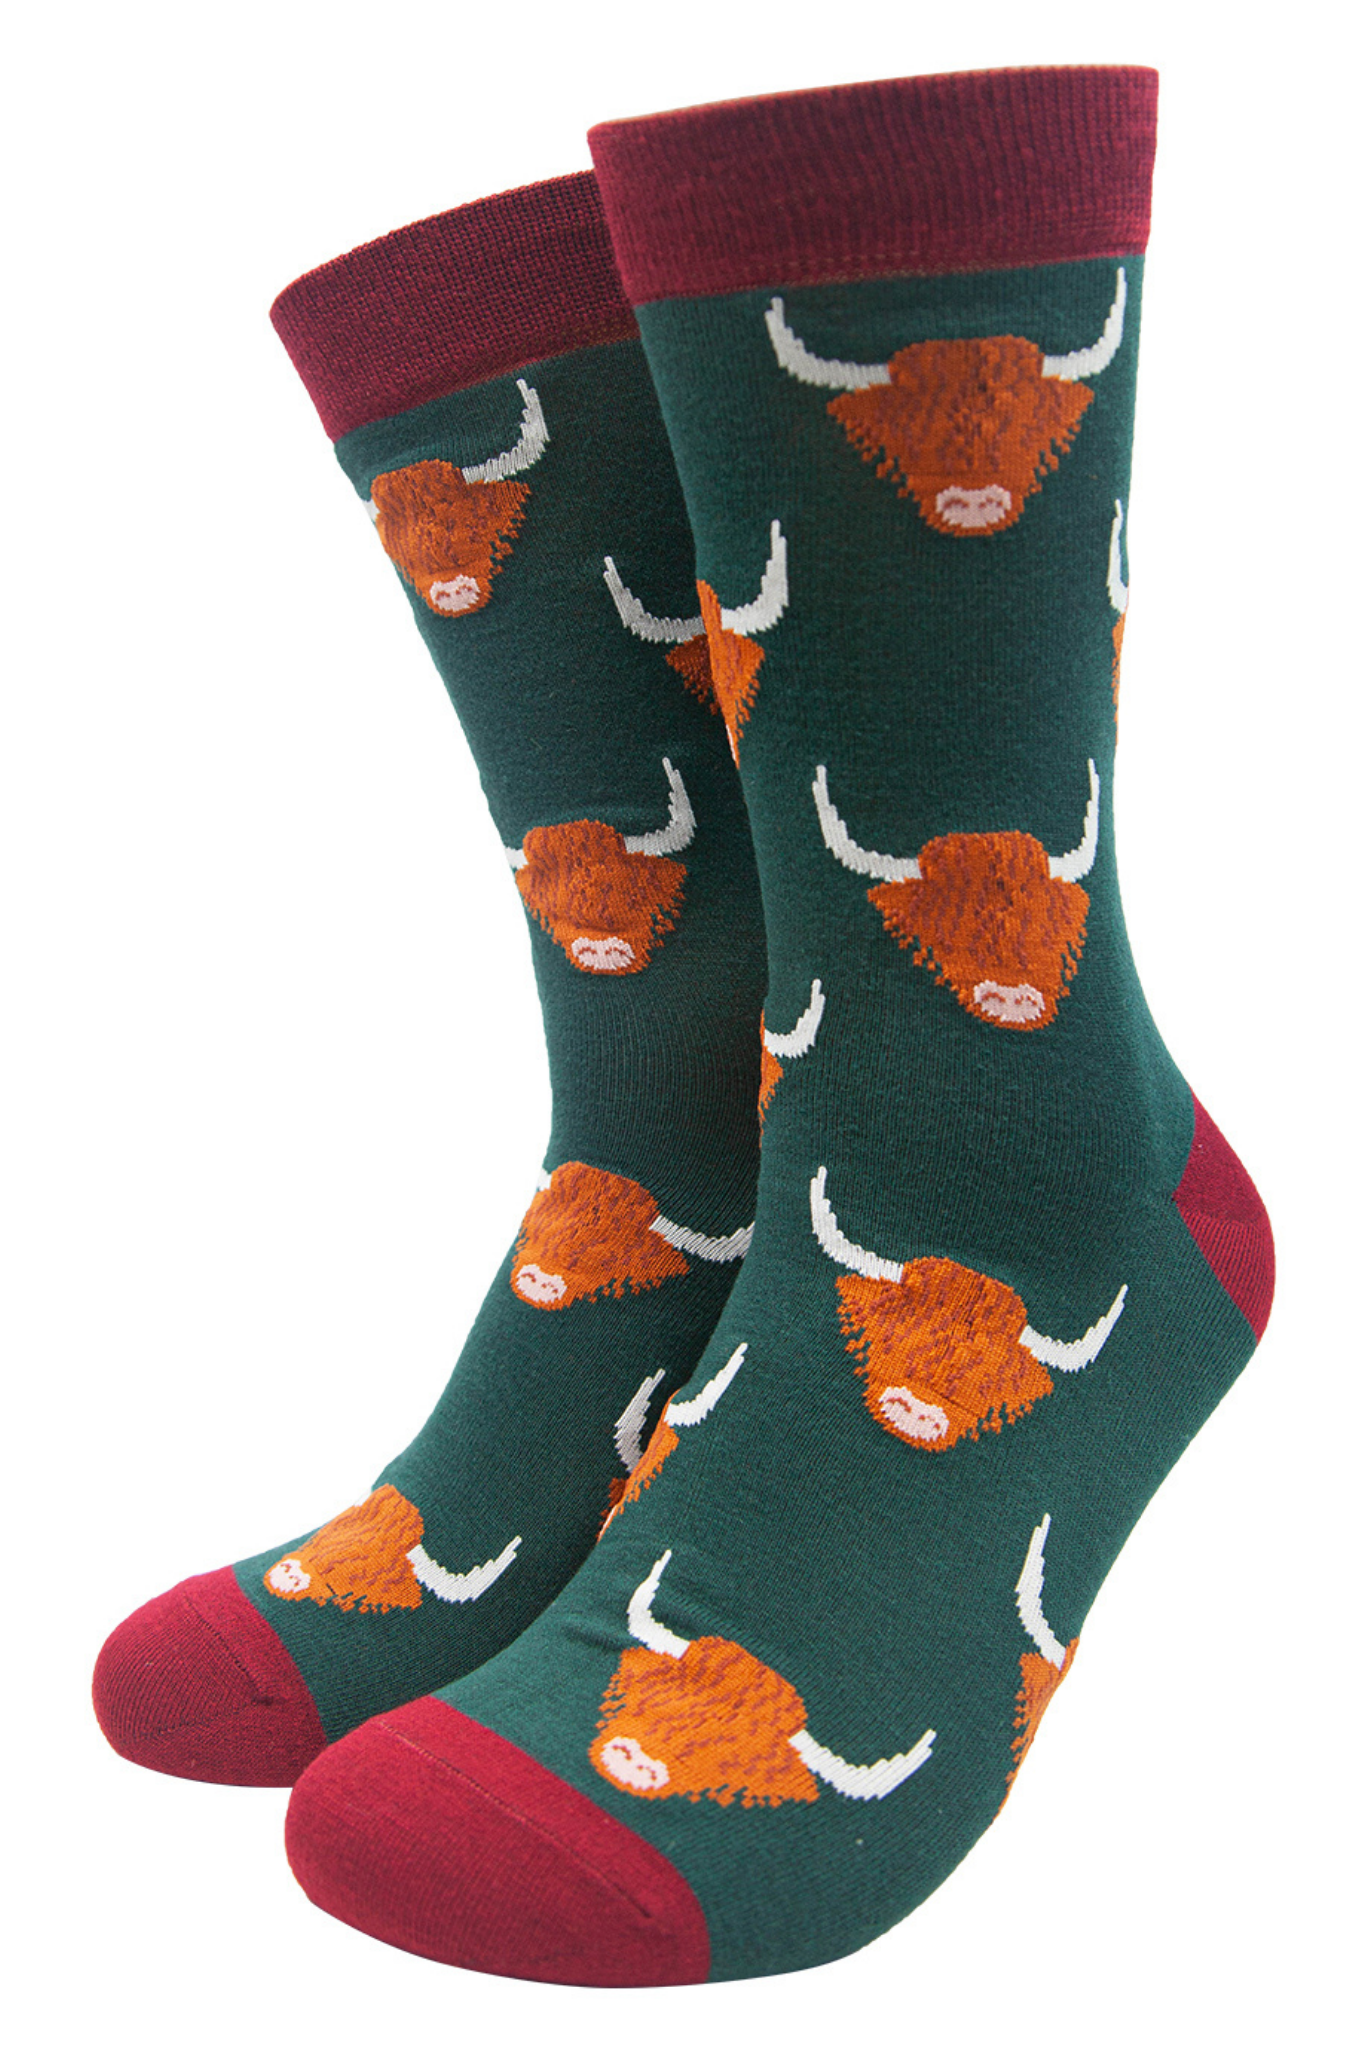 green and red dress socks with highland cows all over